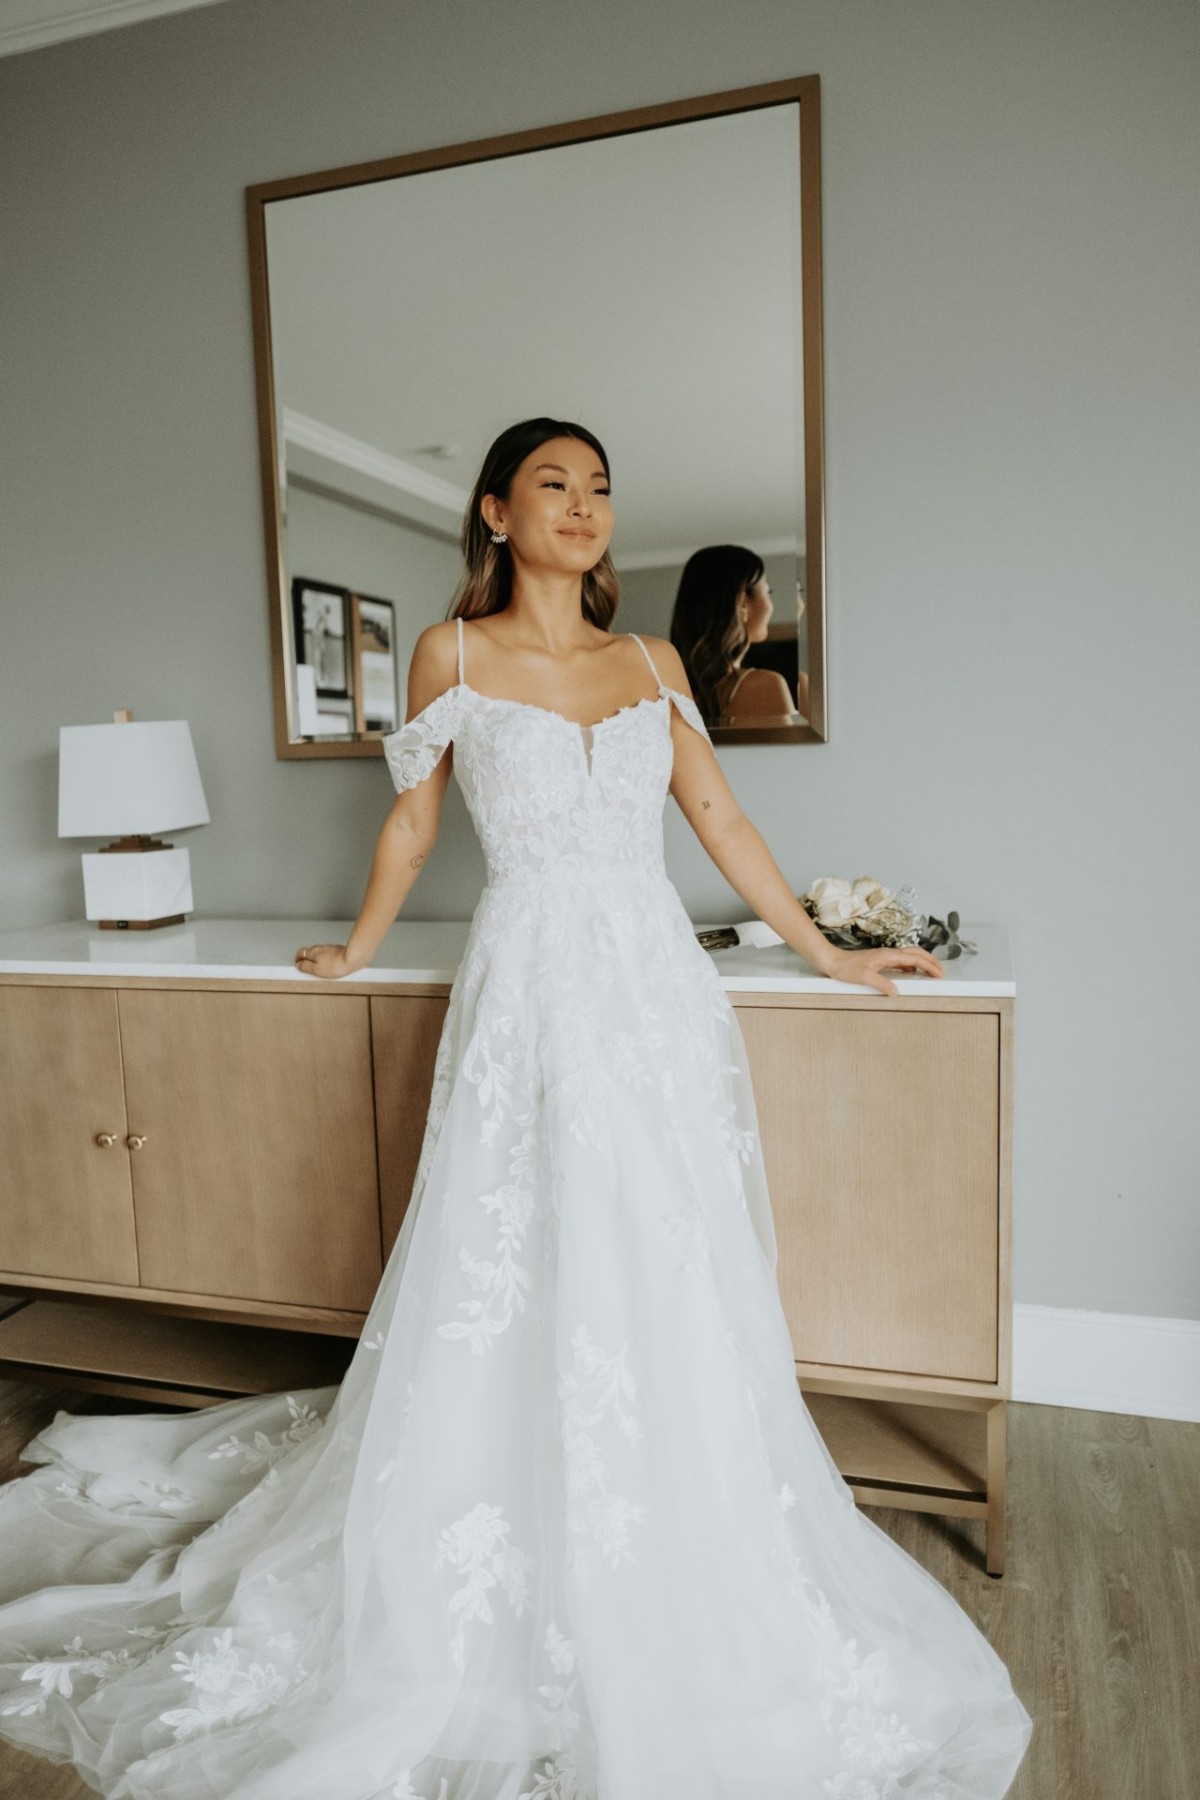 7447 Bali - Size 12 - Chapel train and off the shoulder straps - Stella York collection at Blessings Blessings Bridal & Occasion Wear, Loyal Parade, Mill Rise, Westdene, Brighton. East Sussex BN1 5GG T:01273 505766 E:info@blessingsbridal.co.uk